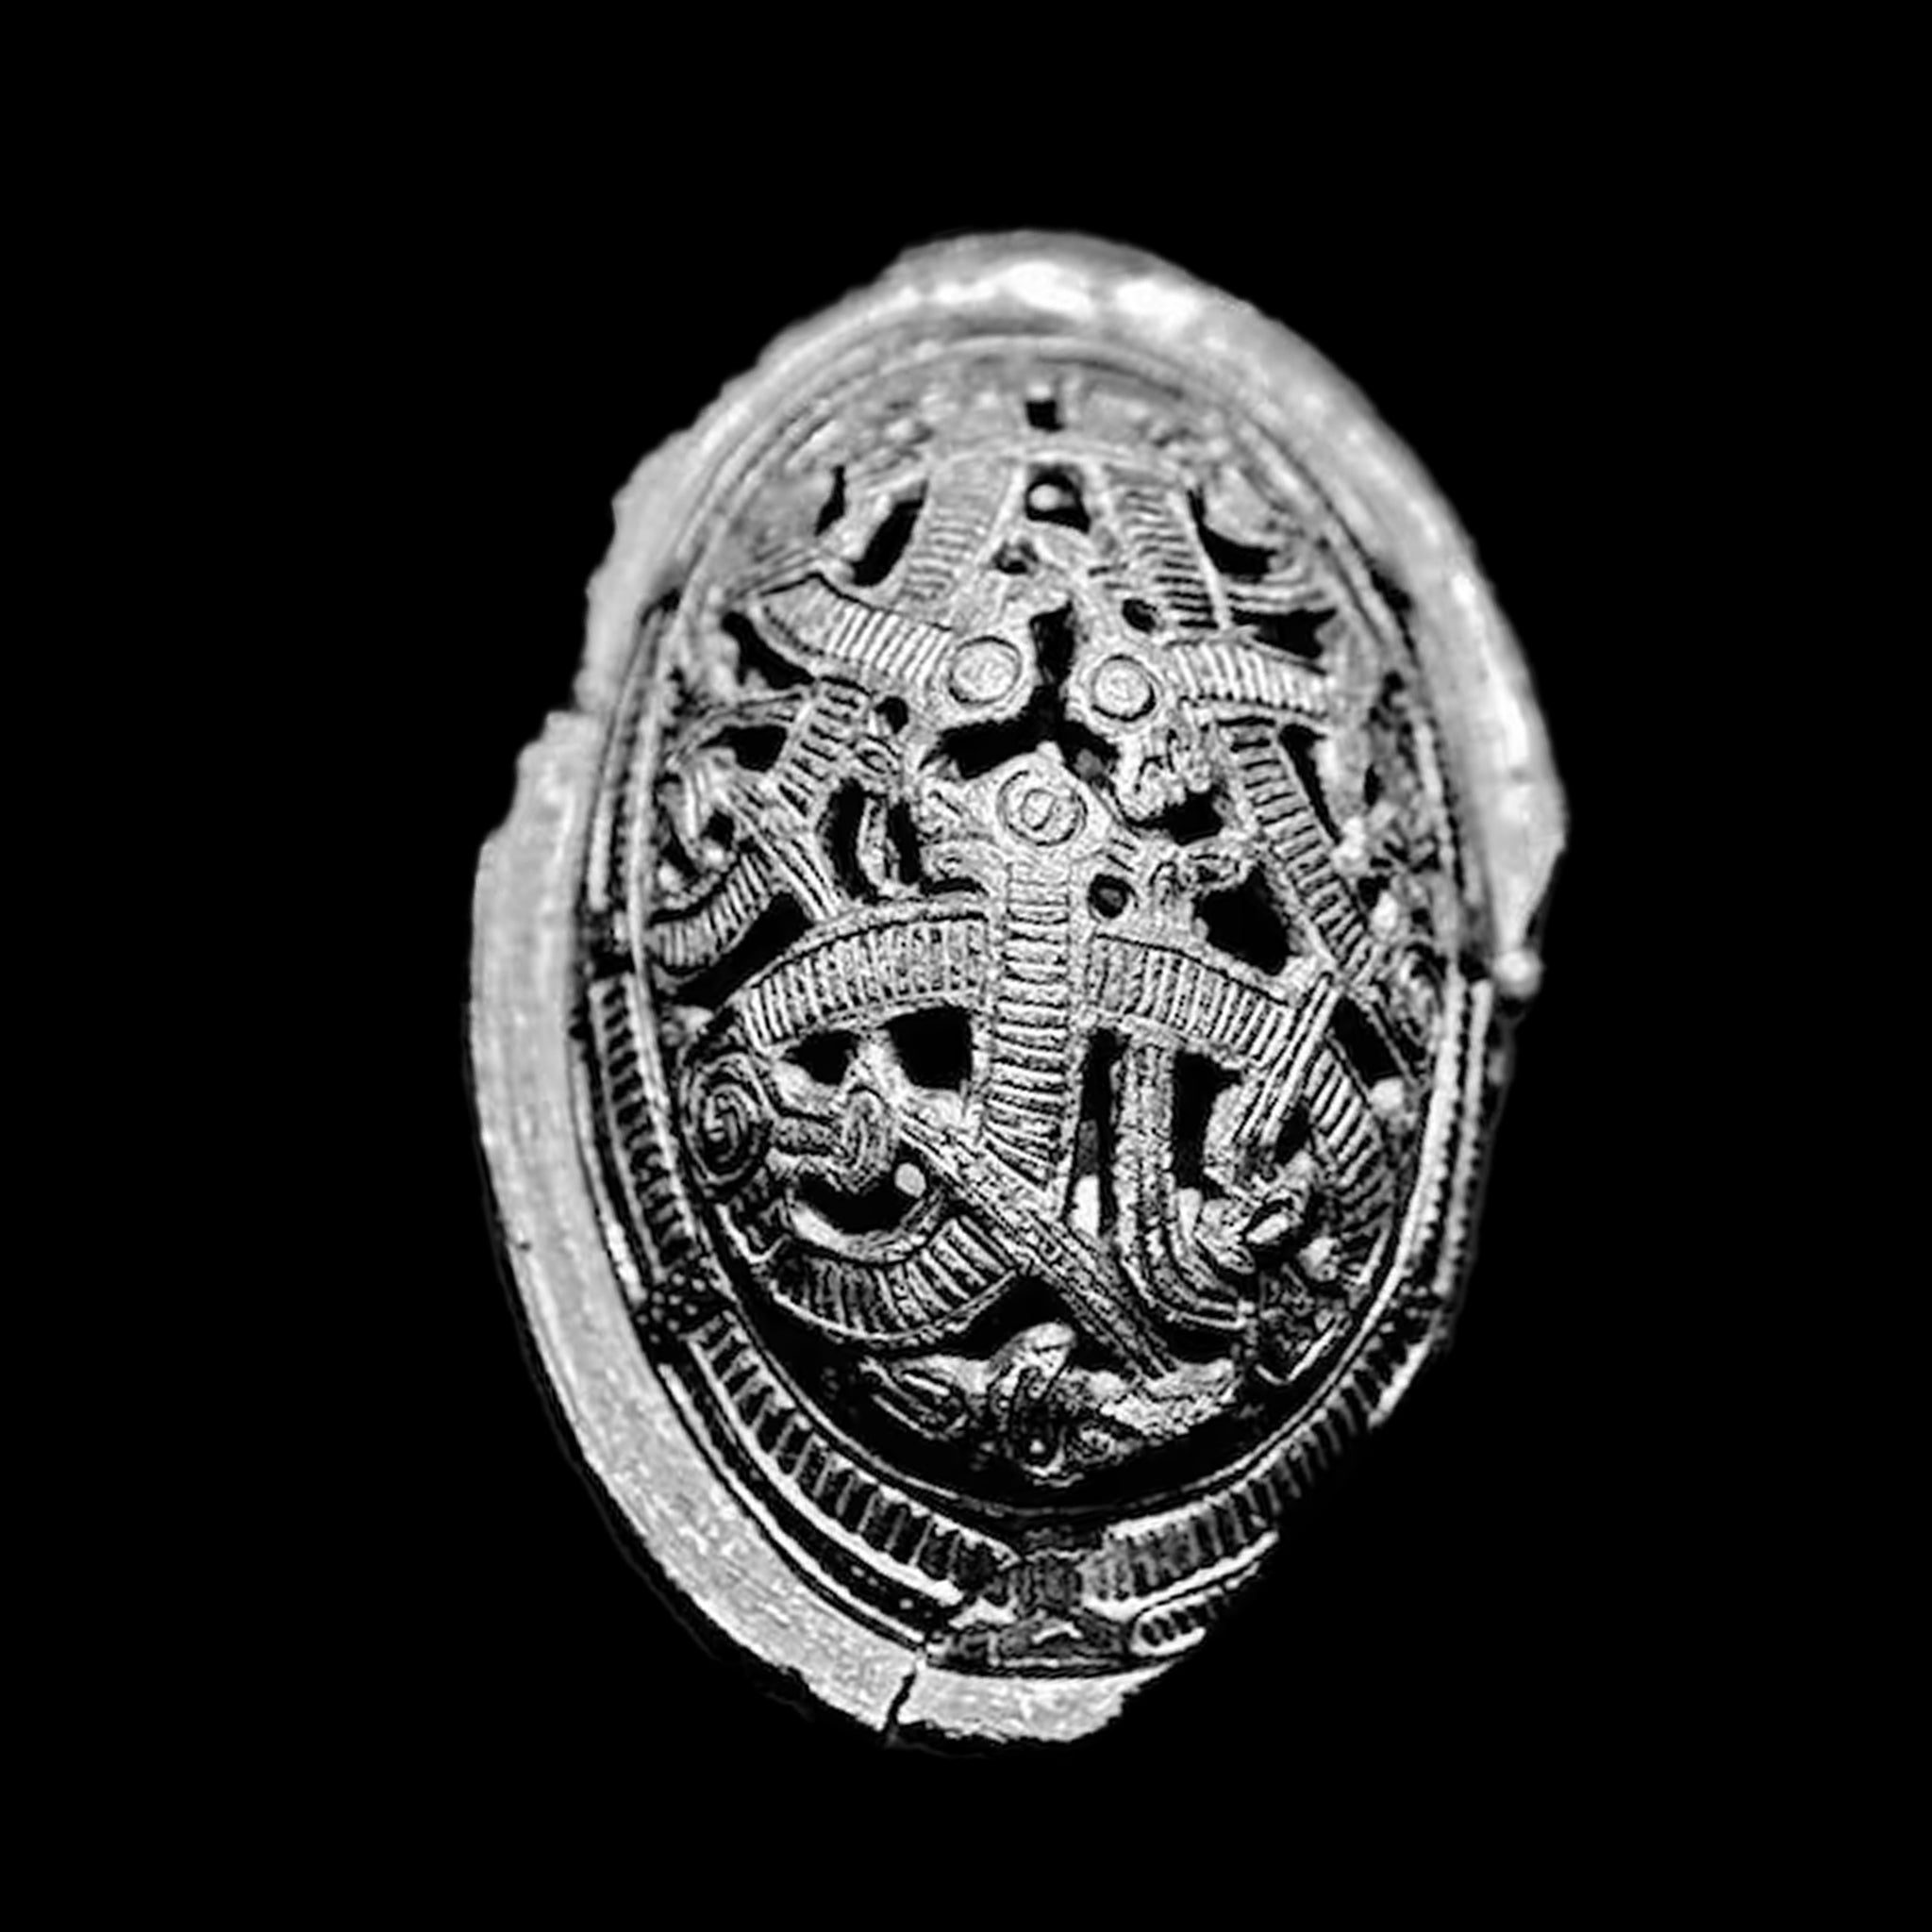 Original Viking Tortoise Brooch from Morberg - Now in Osle, in the Museum of Norway,